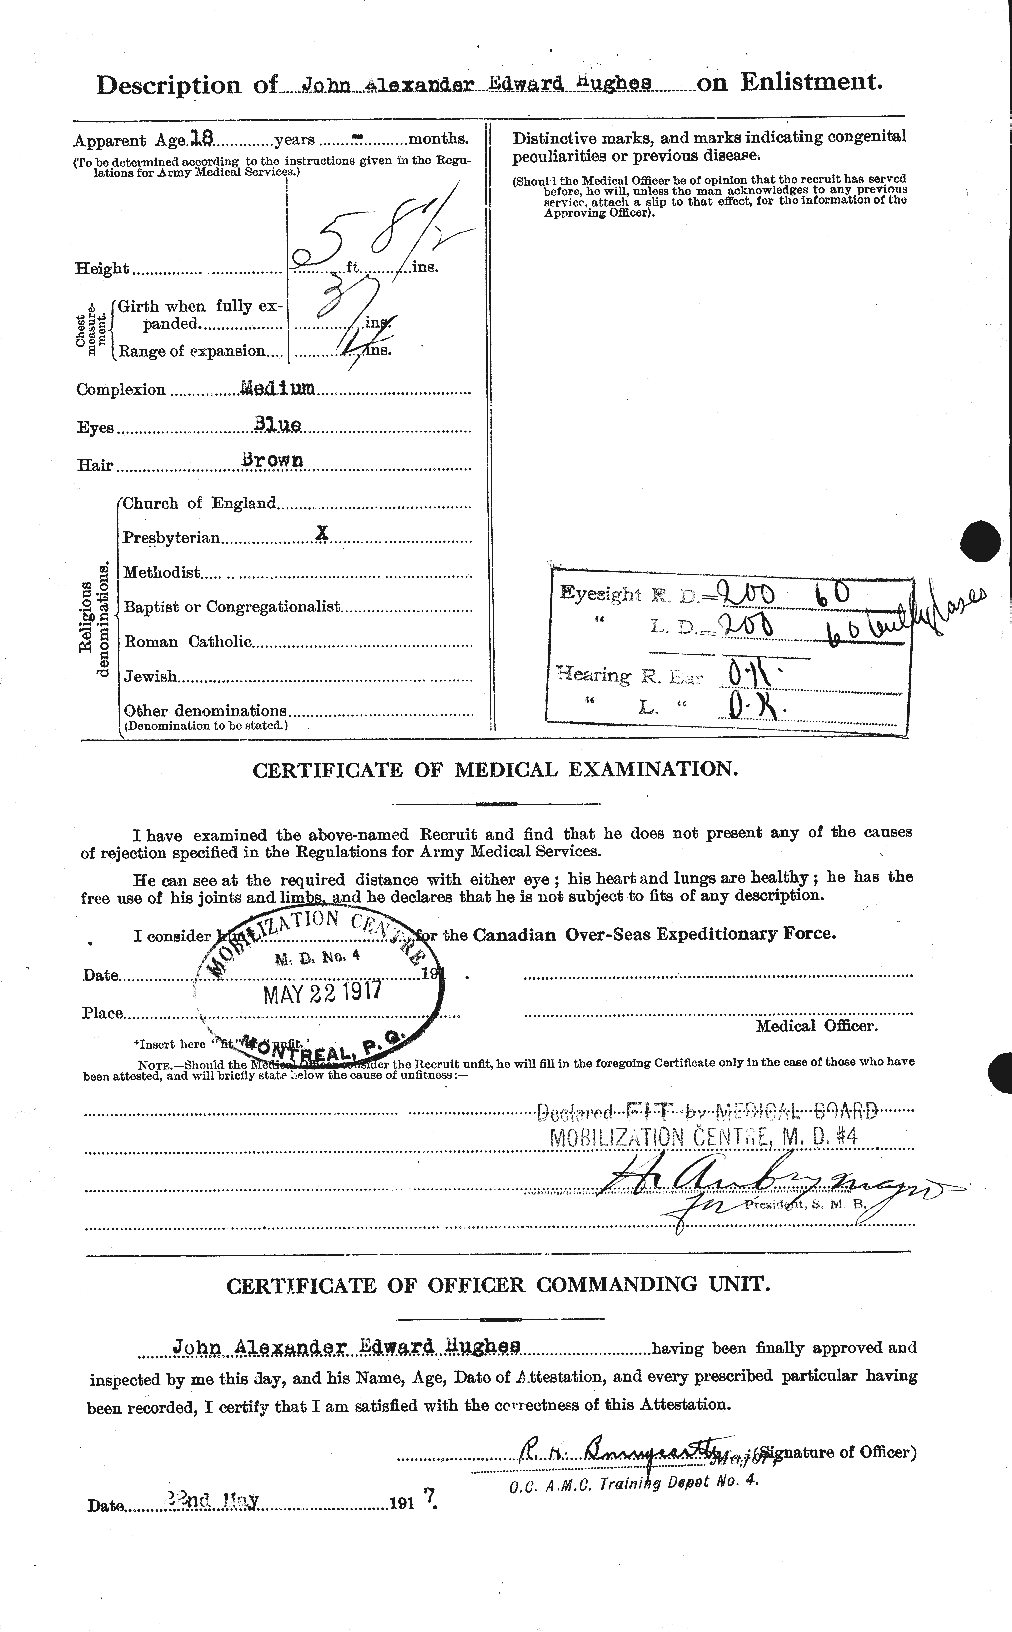 Personnel Records of the First World War - CEF 404005b